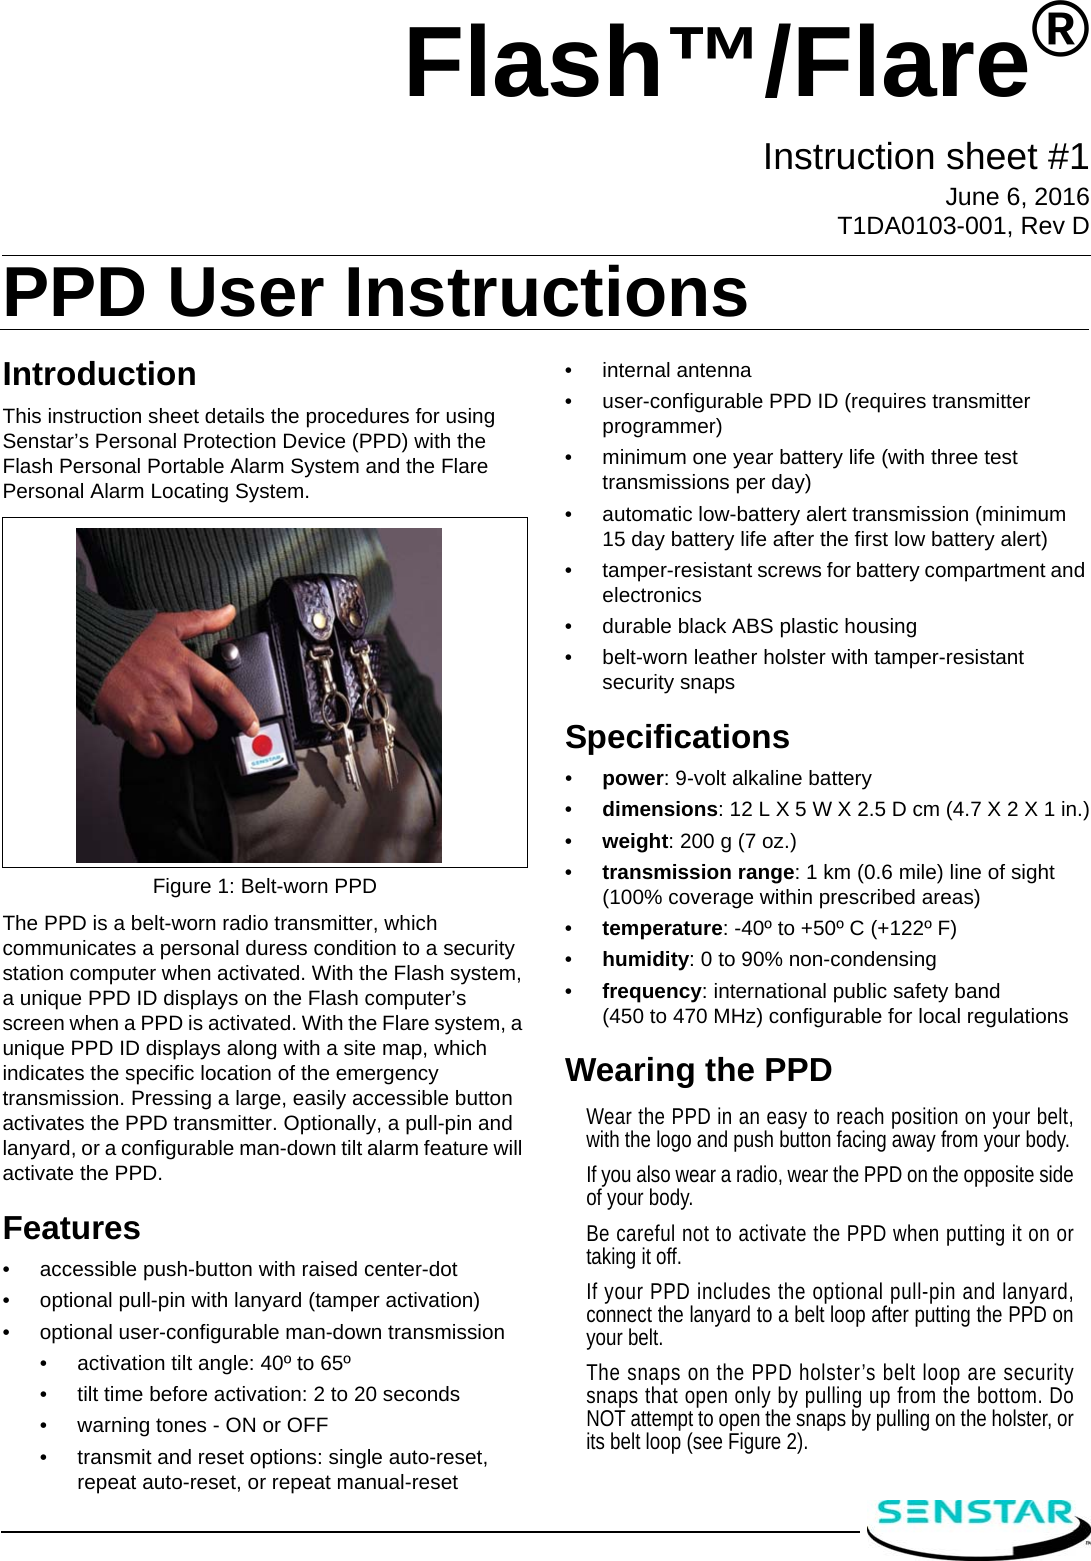 IntroductionThis instruction sheet details the procedures for using Senstar’s Personal Protection Device (PPD) with the Flash Personal Portable Alarm System and the Flare Personal Alarm Locating System.The PPD is a belt-worn radio transmitter, which communicates a personal duress condition to a security station computer when activated. With the Flash system, a unique PPD ID displays on the Flash computer’s screen when a PPD is activated. With the Flare system, a unique PPD ID displays along with a site map, which indicates the specific location of the emergency transmission. Pressing a large, easily accessible button activates the PPD transmitter. Optionally, a pull-pin and lanyard, or a configurable man-down tilt alarm feature will activate the PPD.Features•accessible push-button with raised center-dot •optional pull-pin with lanyard (tamper activation)•optional user-configurable man-down transmission•activation tilt angle: 40º to 65º•tilt time before activation: 2 to 20 seconds•warning tones - ON or OFF•transmit and reset options: single auto-reset, repeat auto-reset, or repeat manual-reset•internal antenna•user-configurable PPD ID (requires transmitter programmer)•minimum one year battery life (with three test transmissions per day)•automatic low-battery alert transmission (minimum 15 day battery life after the first low battery alert)•tamper-resistant screws for battery compartment and electronics•durable black ABS plastic housing•belt-worn leather holster with tamper-resistant security snapsSpecifications•power: 9-volt alkaline battery•dimensions: 12 L X 5 W X 2.5 D cm (4.7 X 2 X 1 in.)•weight: 200 g (7 oz.)•transmission range: 1 km (0.6 mile) line of sight (100% coverage within prescribed areas)•temperature: -40º to +50º C (+122º F)•humidity: 0 to 90% non-condensing•frequency: international public safety band (450 to 470 MHz) configurable for local regulationsWearing the PPDWear the PPD in an easy to reach position on your belt,with the logo and push button facing away from your body.If you also wear a radio, wear the PPD on the opposite sideof your body.Be careful not to activate the PPD when putting it on ortaking it off.If your PPD includes the optional pull-pin and lanyard,connect the lanyard to a belt loop after putting the PPD onyour belt.The snaps on the PPD holster’s belt loop are securitysnaps that open only by pulling up from the bottom. DoNOT attempt to open the snaps by pulling on the holster, orits belt loop (see Figure 2).Figure 1: Belt-worn PPDFlash™/Flare®Instruction sheet #1June 6, 2016 T1DA0103-001, Rev DPPD User Instructions